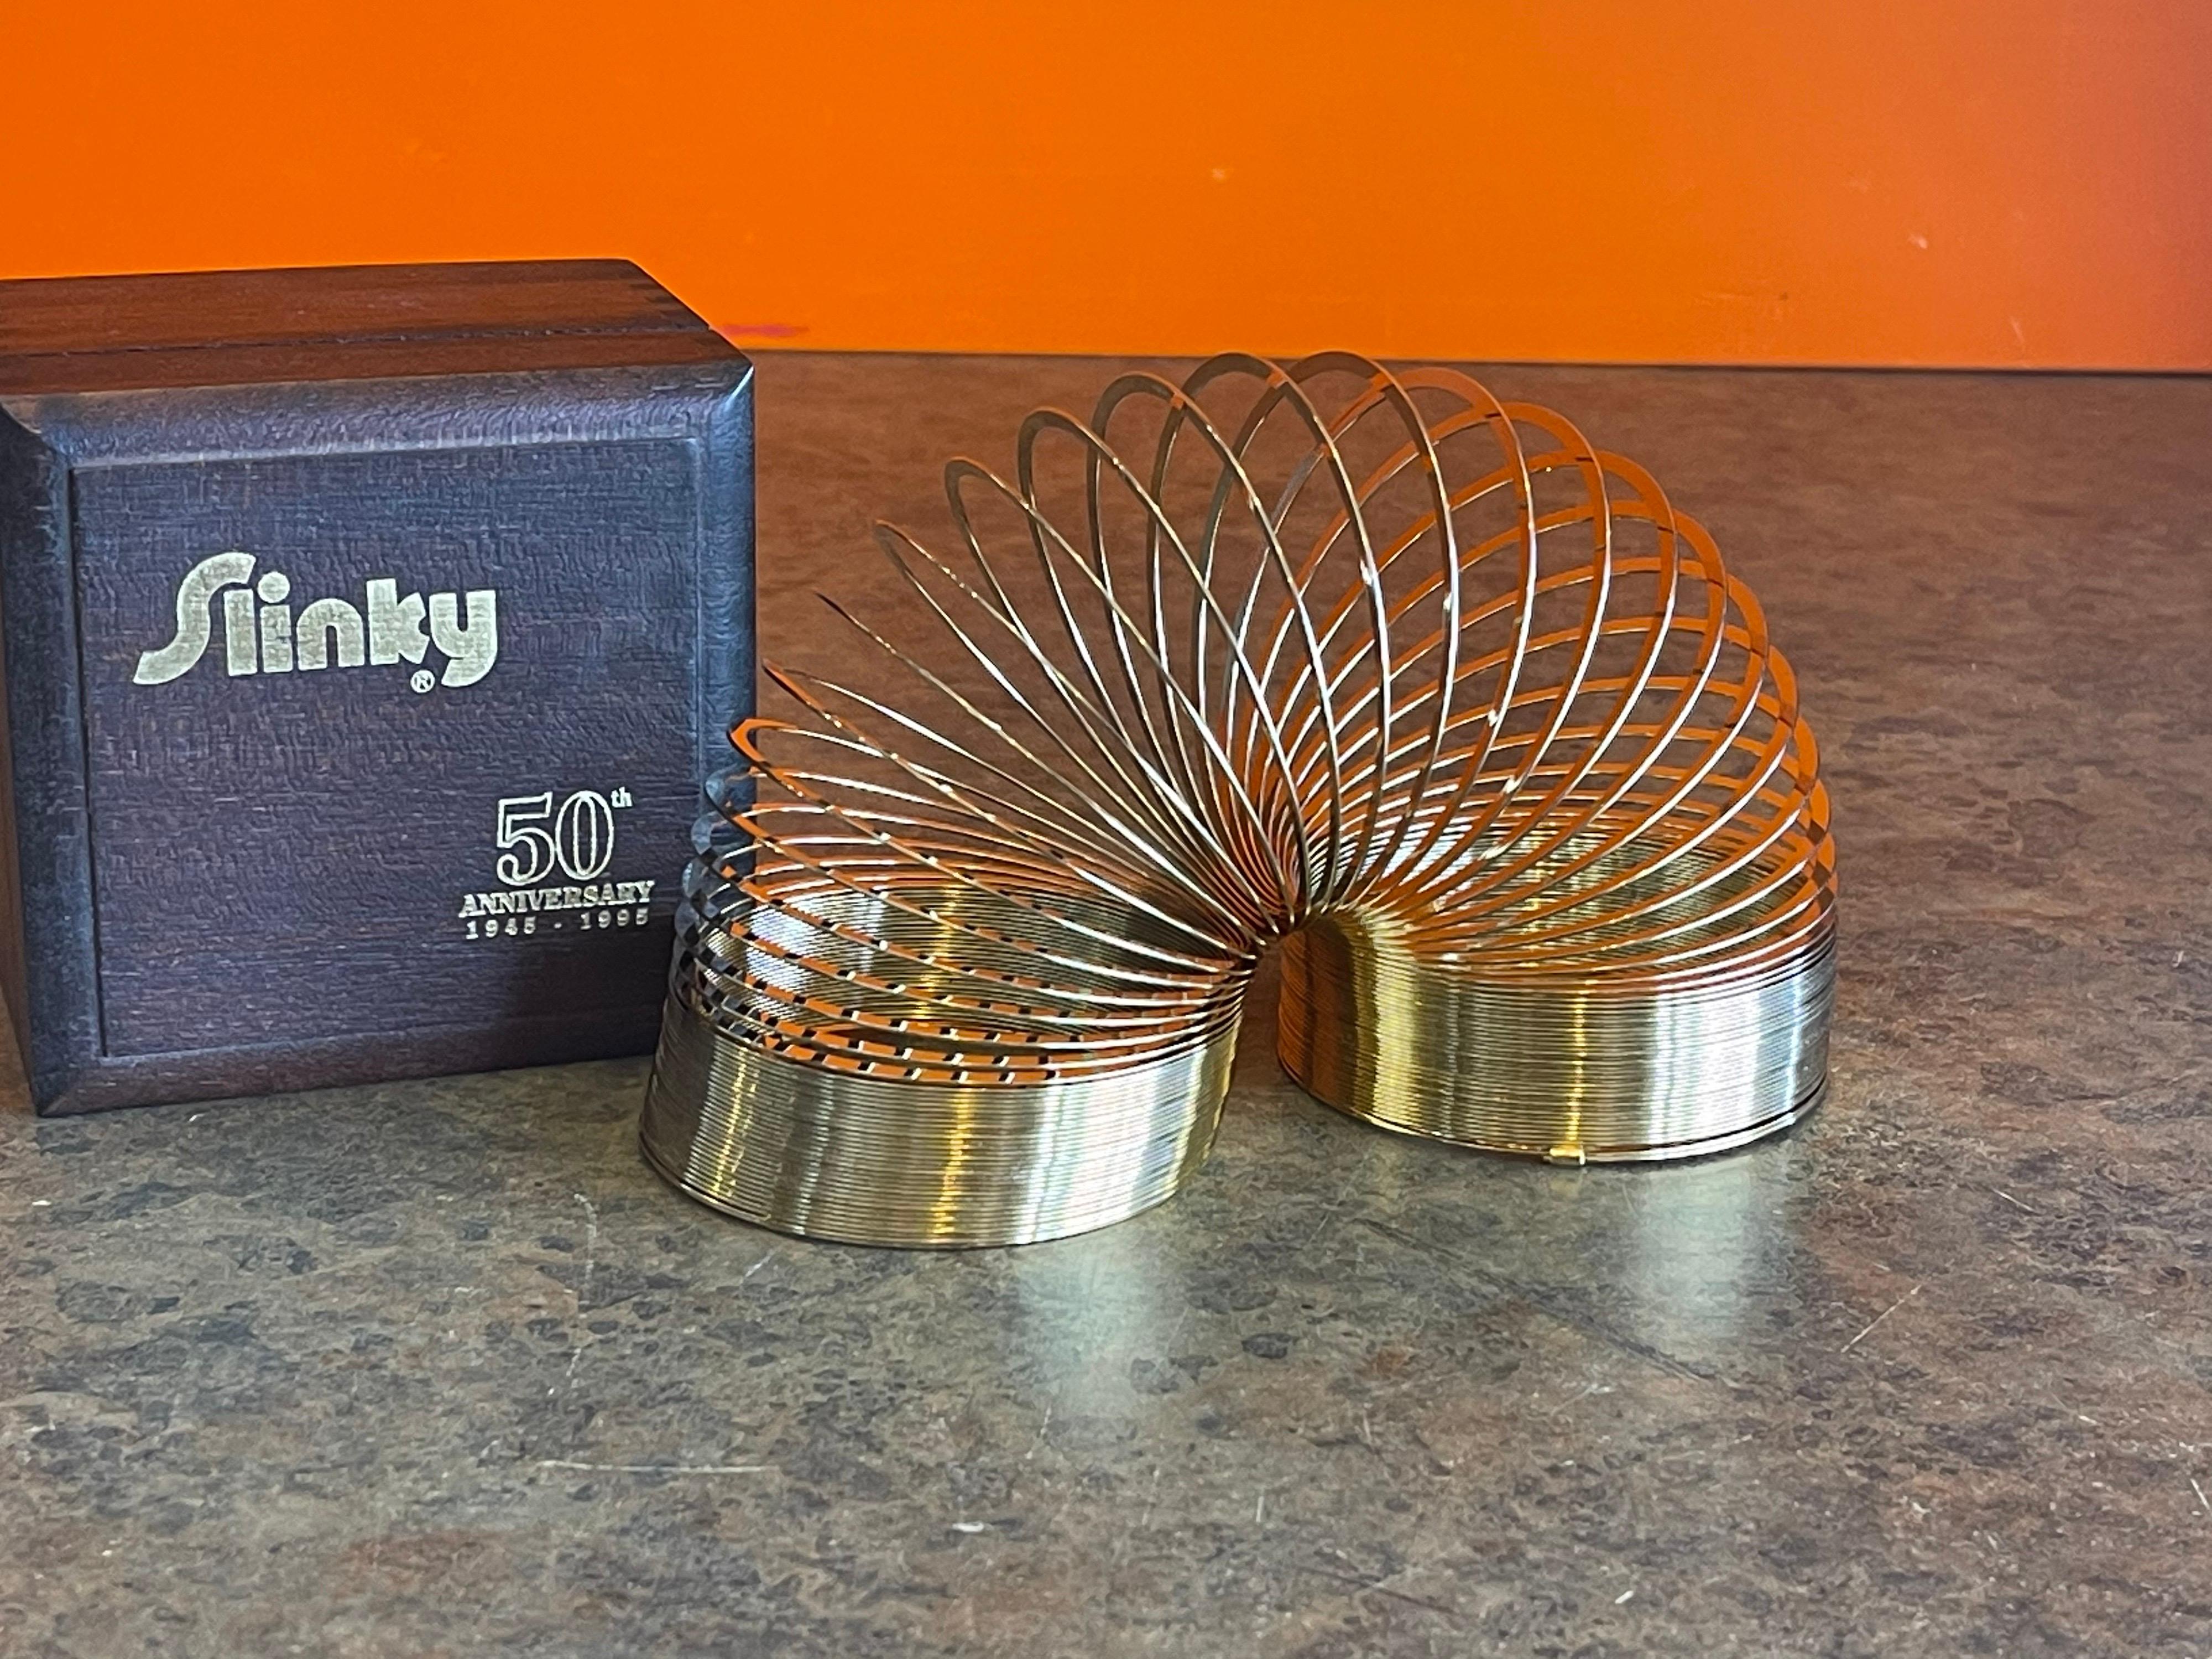 American 50th Anniversary Gold-Plated Slinky Toy in Wood Box